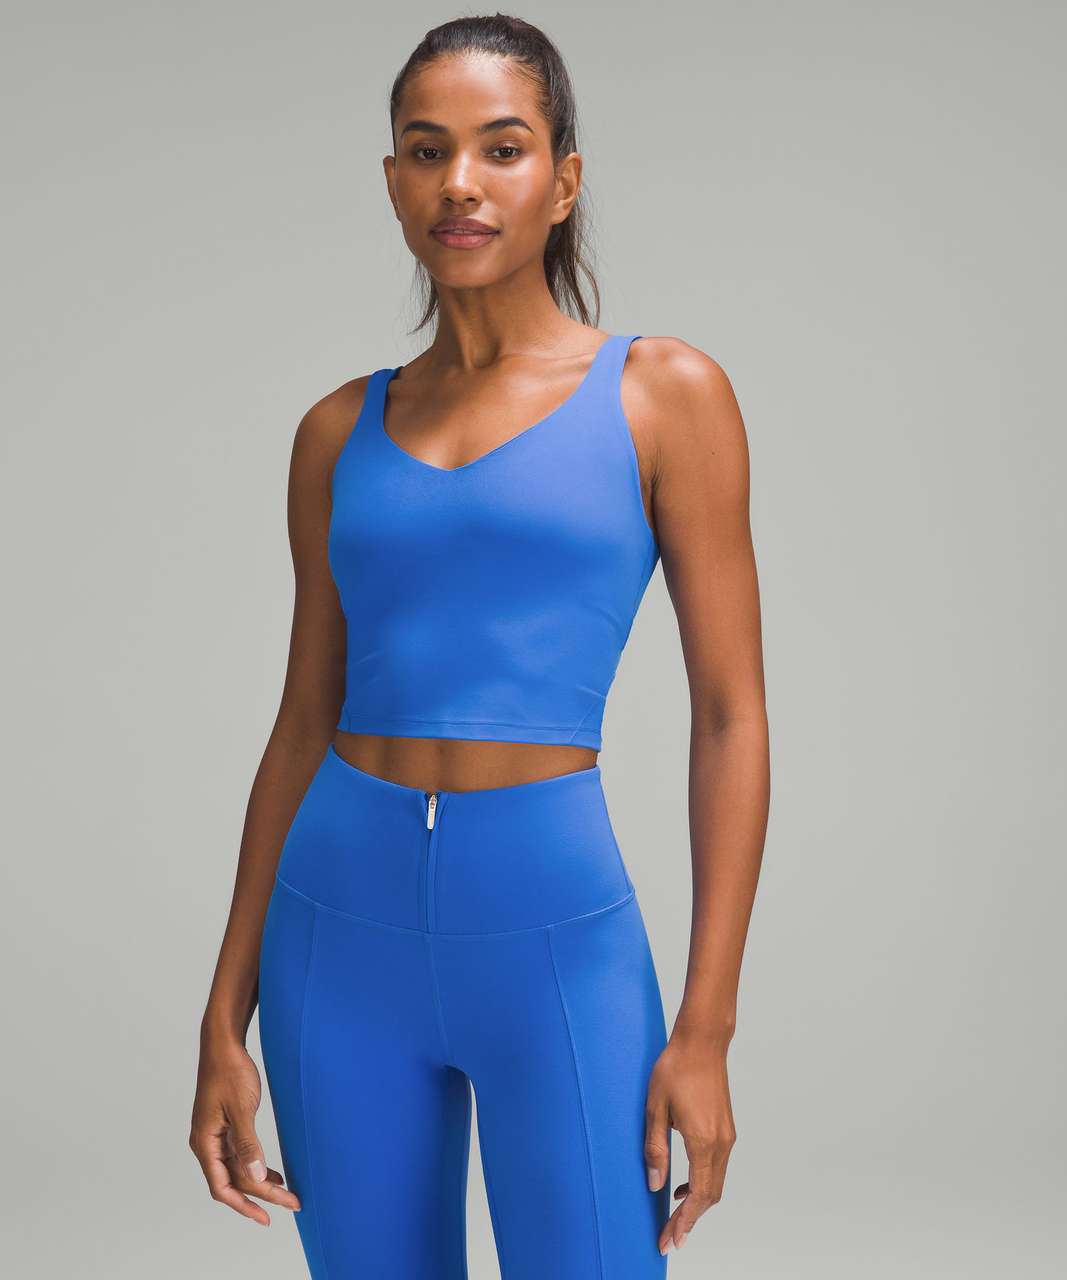 Lululemon Align Tank Blue Size 4 - $40 (38% Off Retail) - From Paige